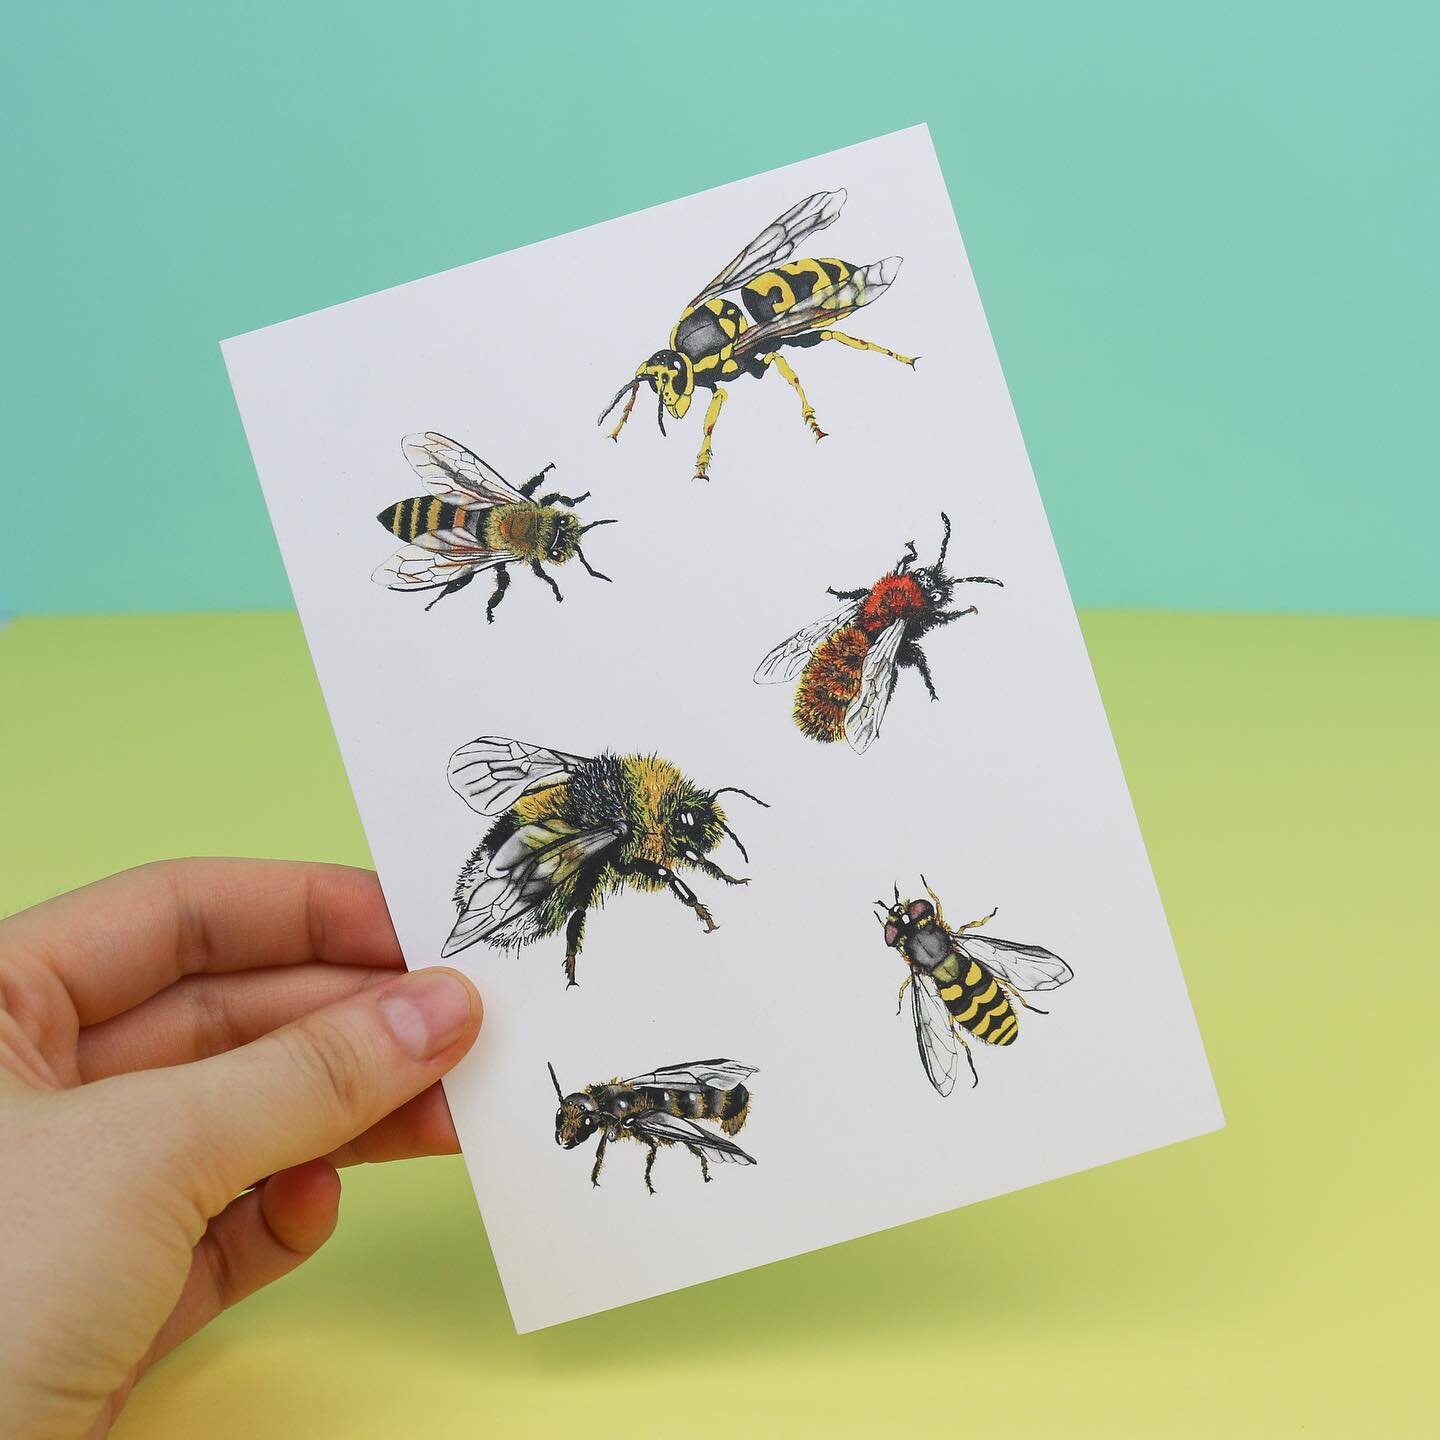 ✉️ An awesome greeting card is made with my bees on it!

I had the opportunity to work with a group of illustrators on a childrens book about the world of bees!🐝 

🖼 Our illustrations are now exhibited for the second time🎉 This time in the @dewere